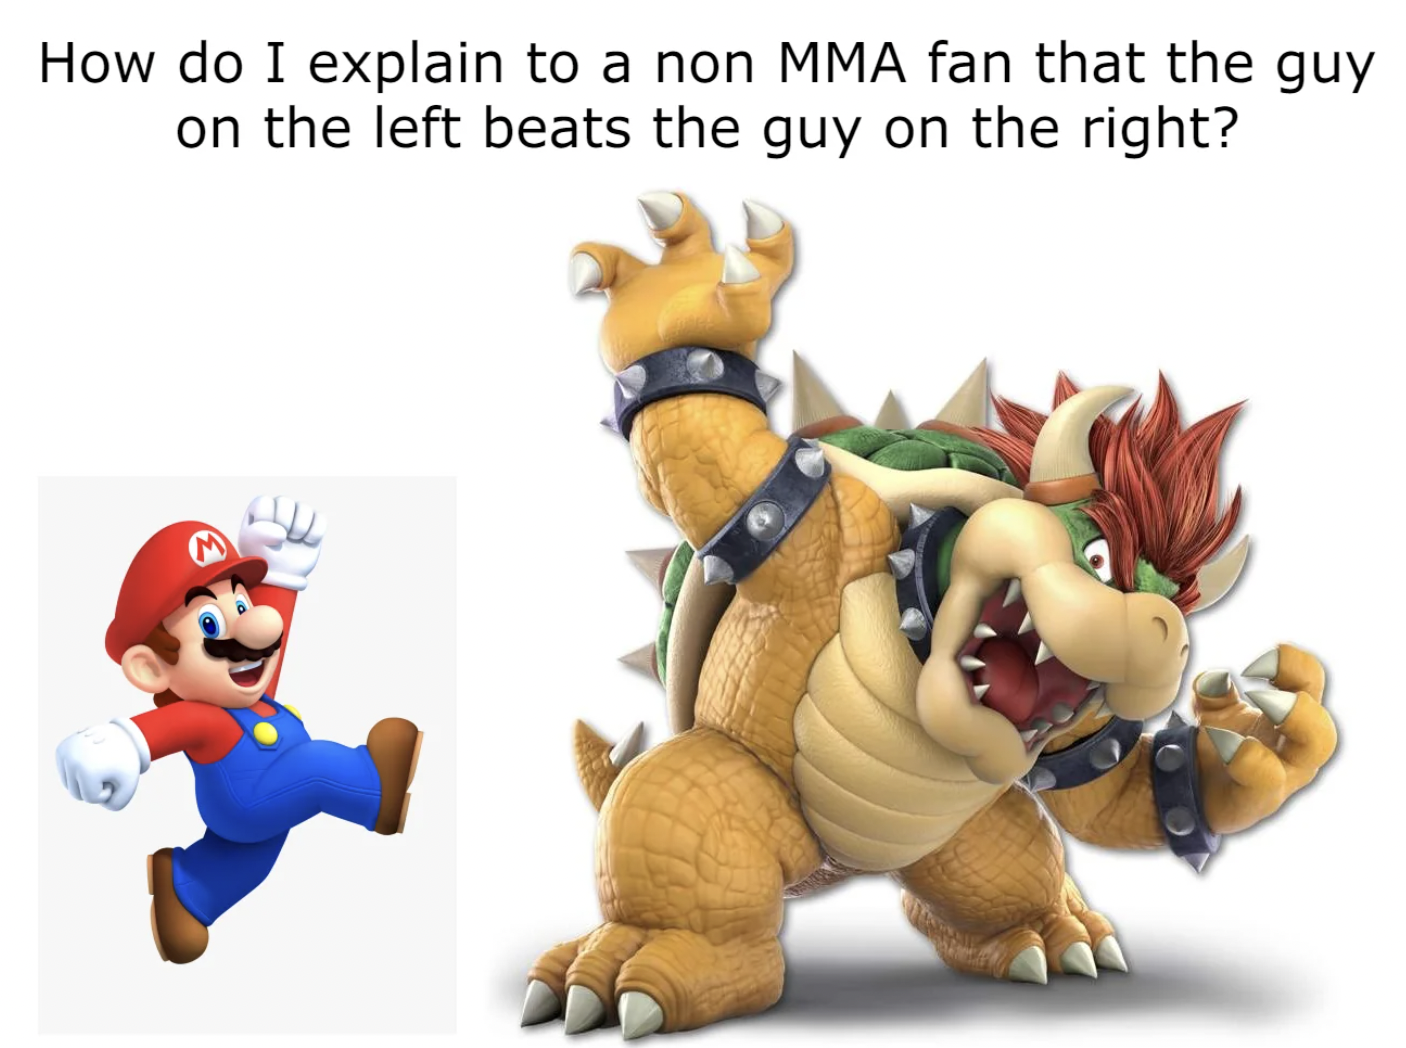 mario super smash bros character - How do I explain to a non Mma fan that the guy on the left beats the guy on the right?